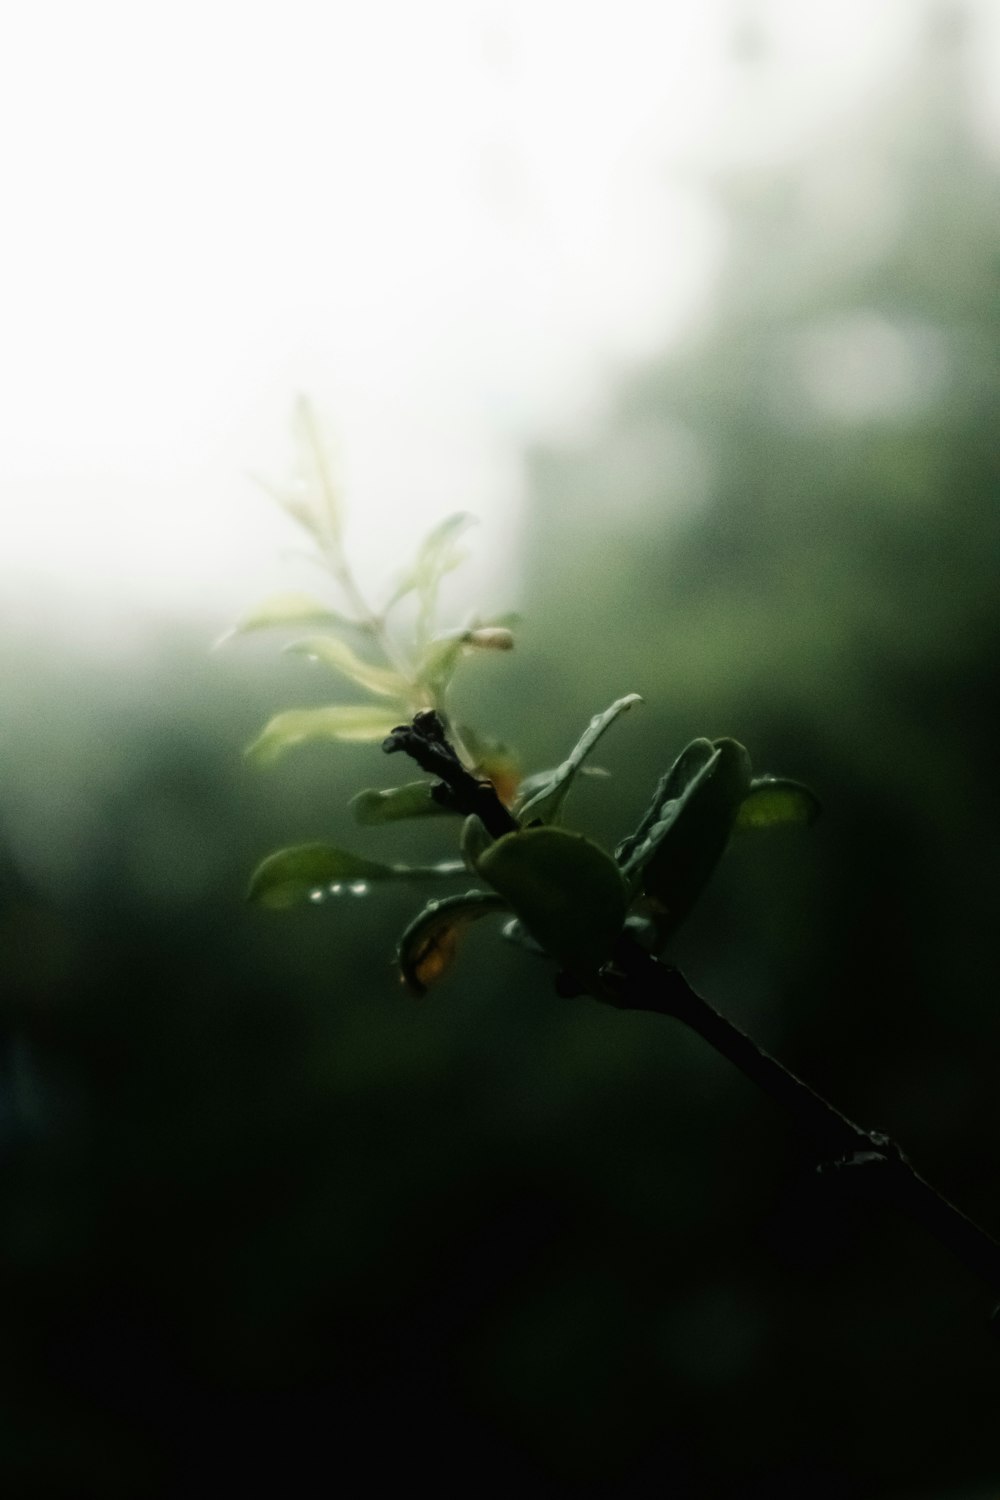 a tree branch with leaves and a blurry background